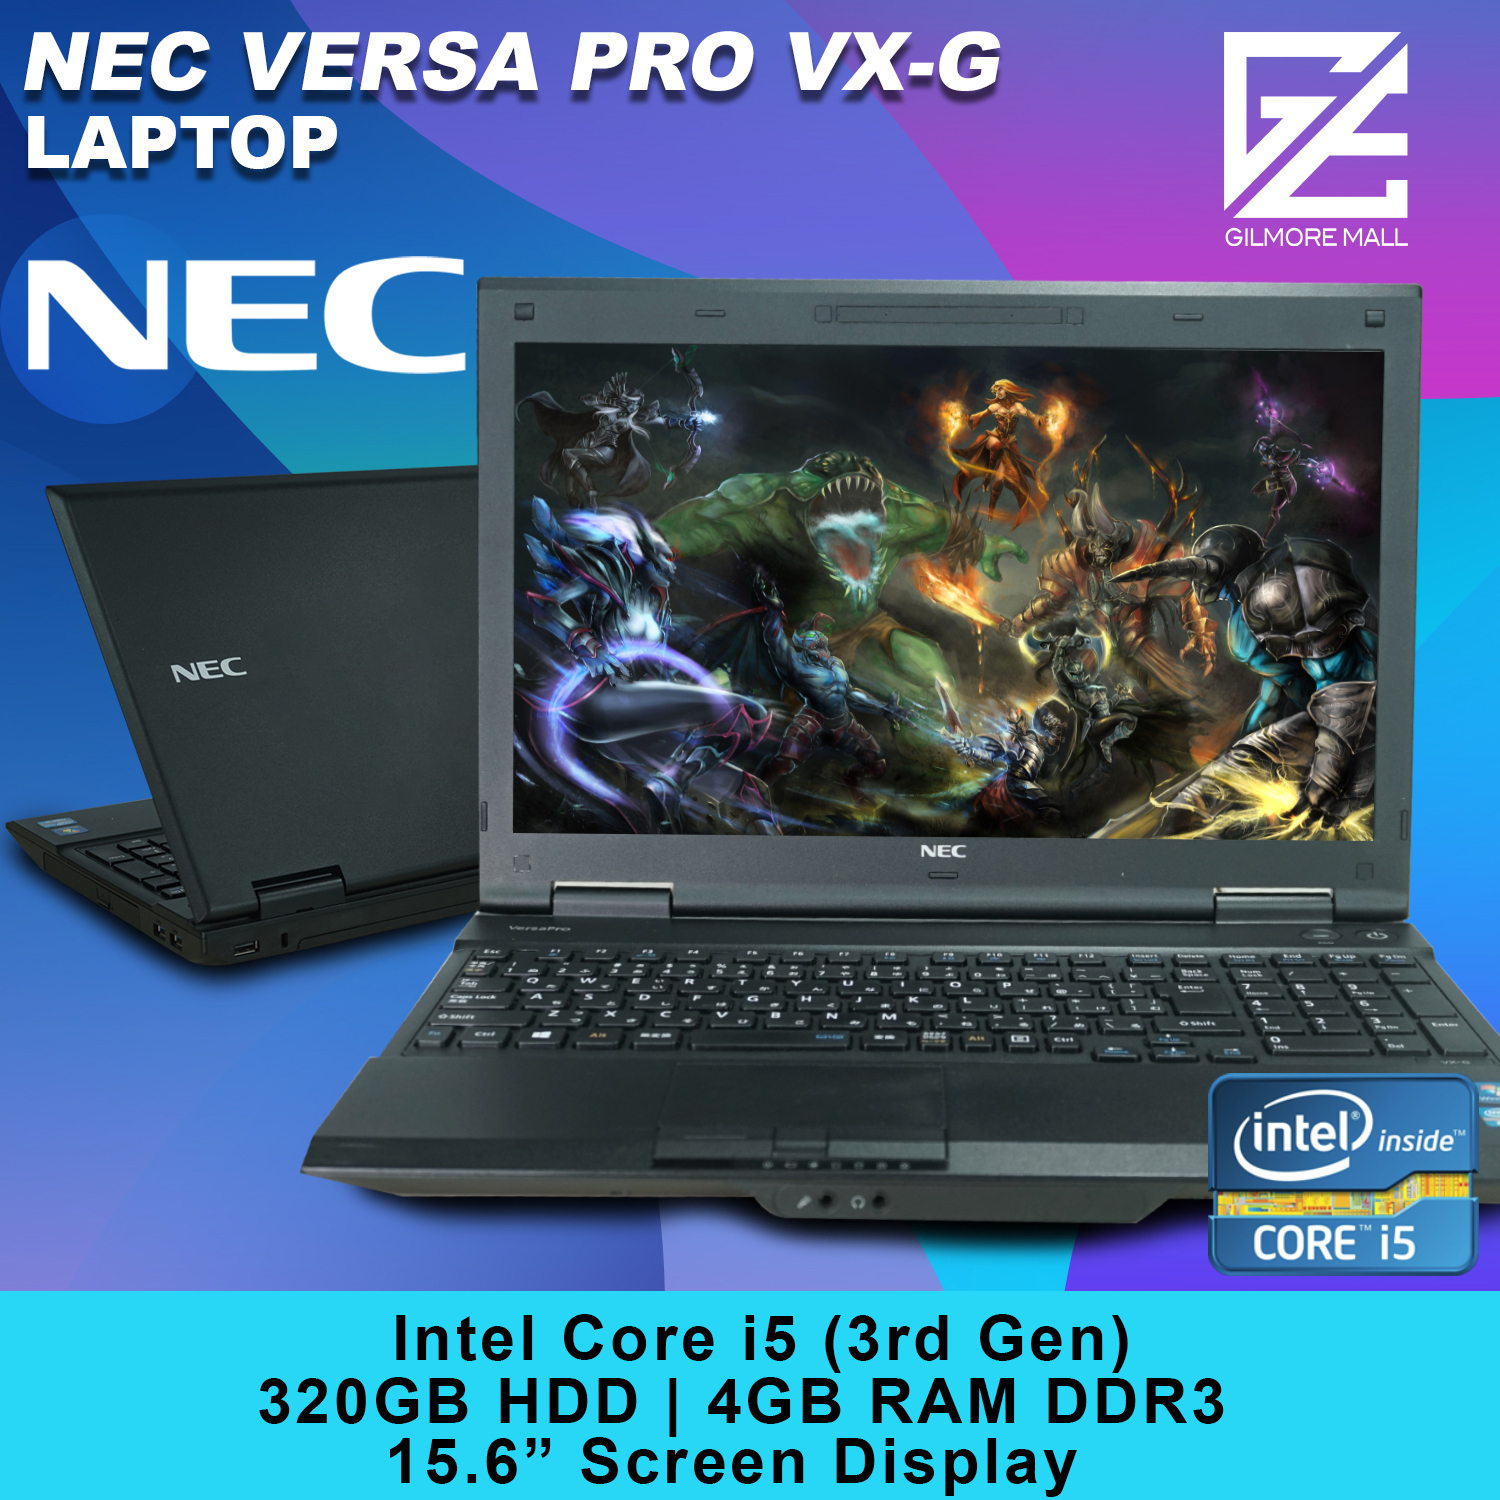 Nec Versapro Vx G Laptop Intel Core I5 3340m 4gb Ram Ddr3 3gb Hdd Free Bag And Charger We Also Have Monitor Laptop Desktop Computer Gaming Pc Cpu I3 I5